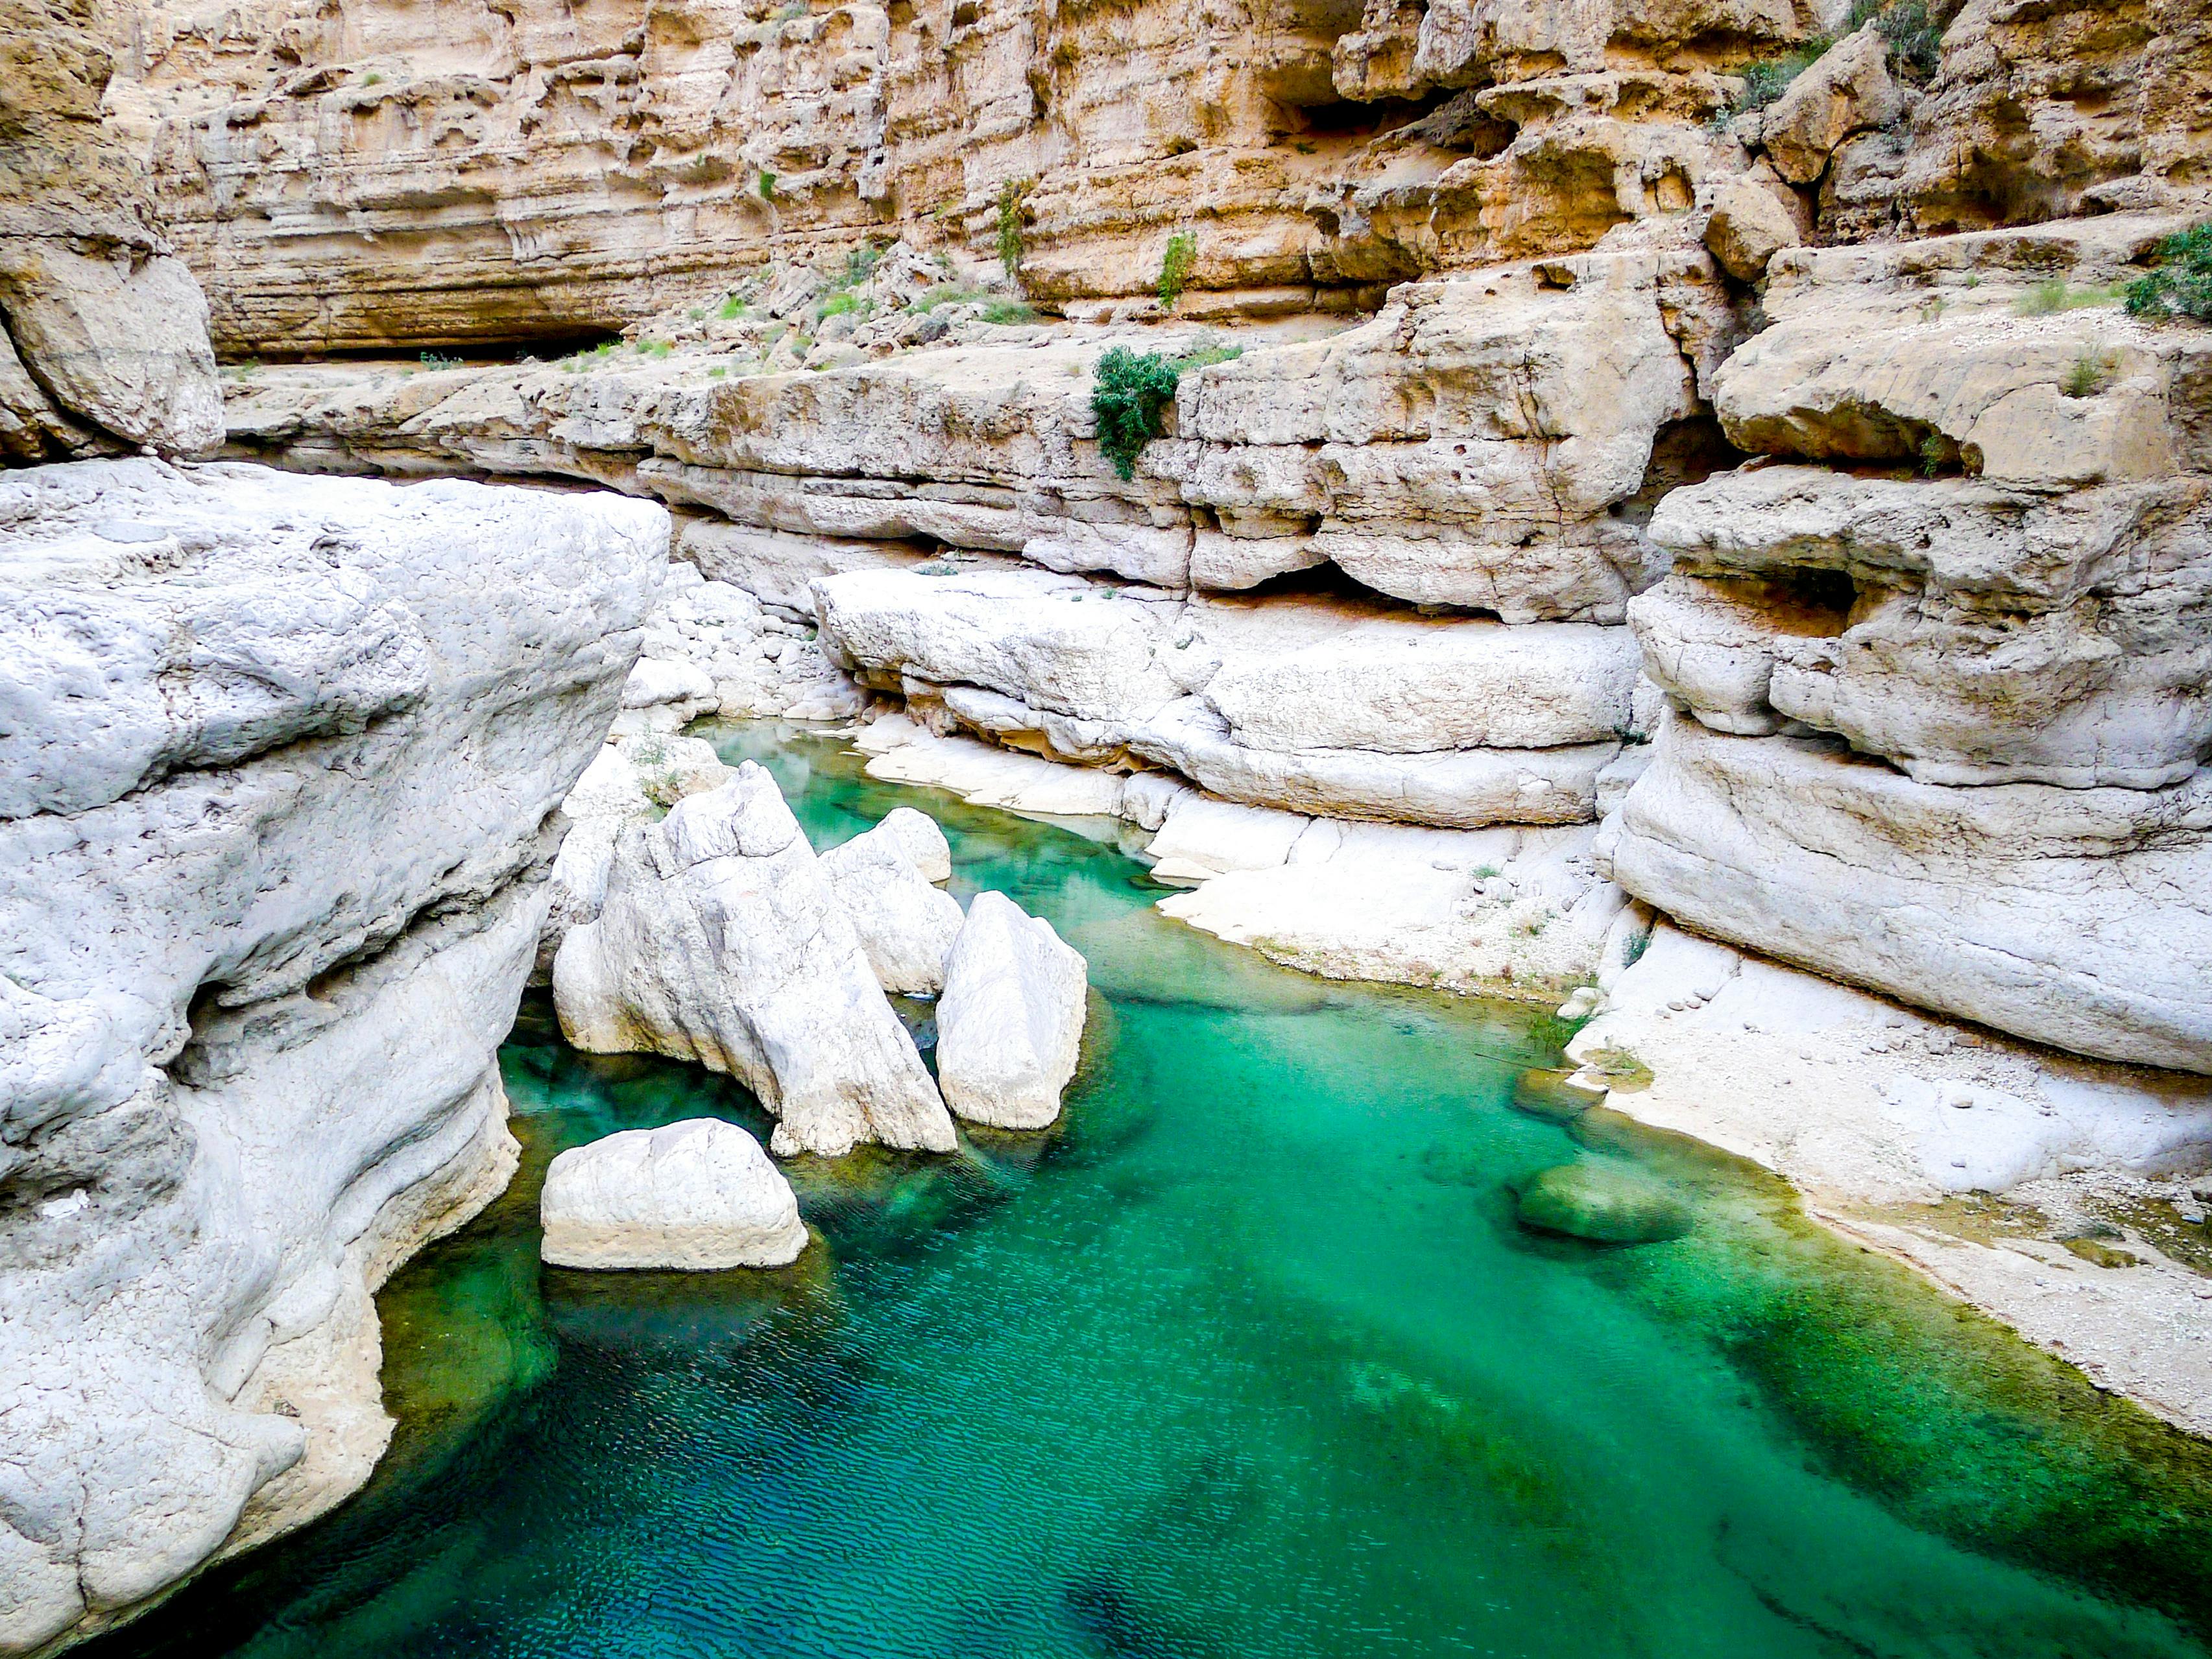 Private tour of Bimah Sinkhole and Wadi Shab on 4x4 Musement